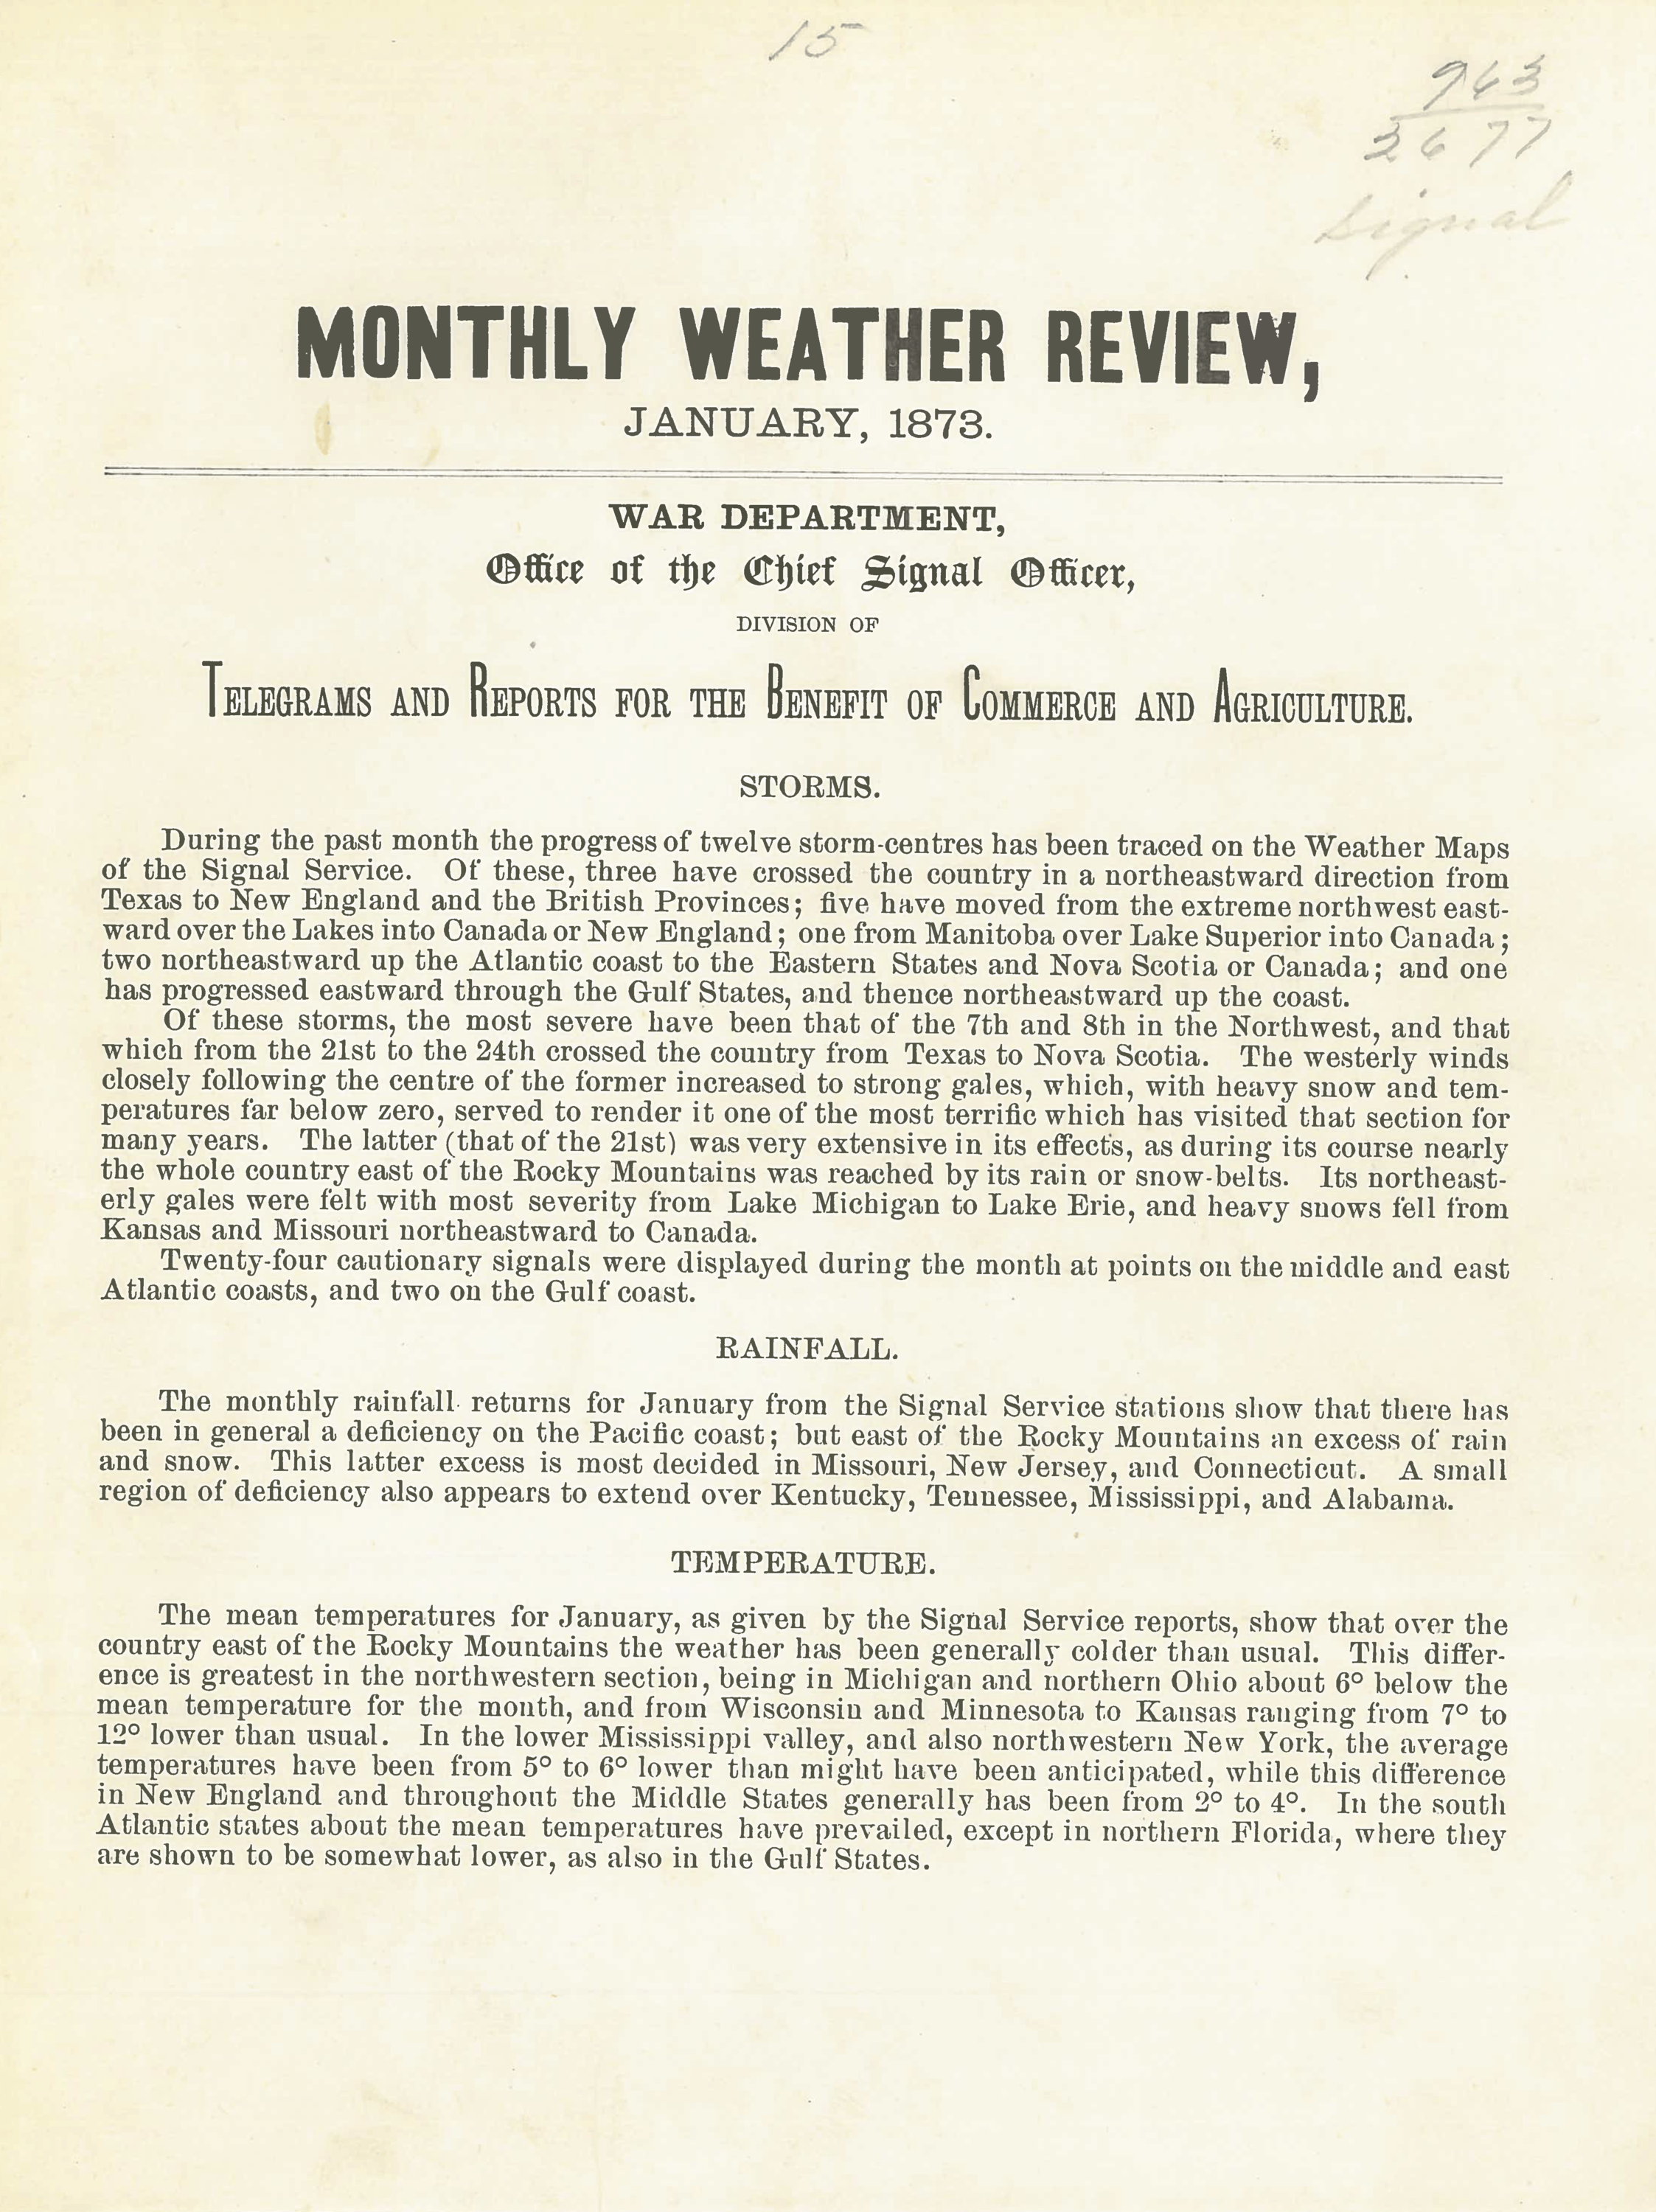 One-page written summary of weather from January 1873 issue of Monthly Weather Review. The sizes of the full page (including margins cropped for display here) is 8 in. × 10 in. for the text page. Scan courtesy of Deirdre Clarkin, NOAA Central and Regional Libraries.